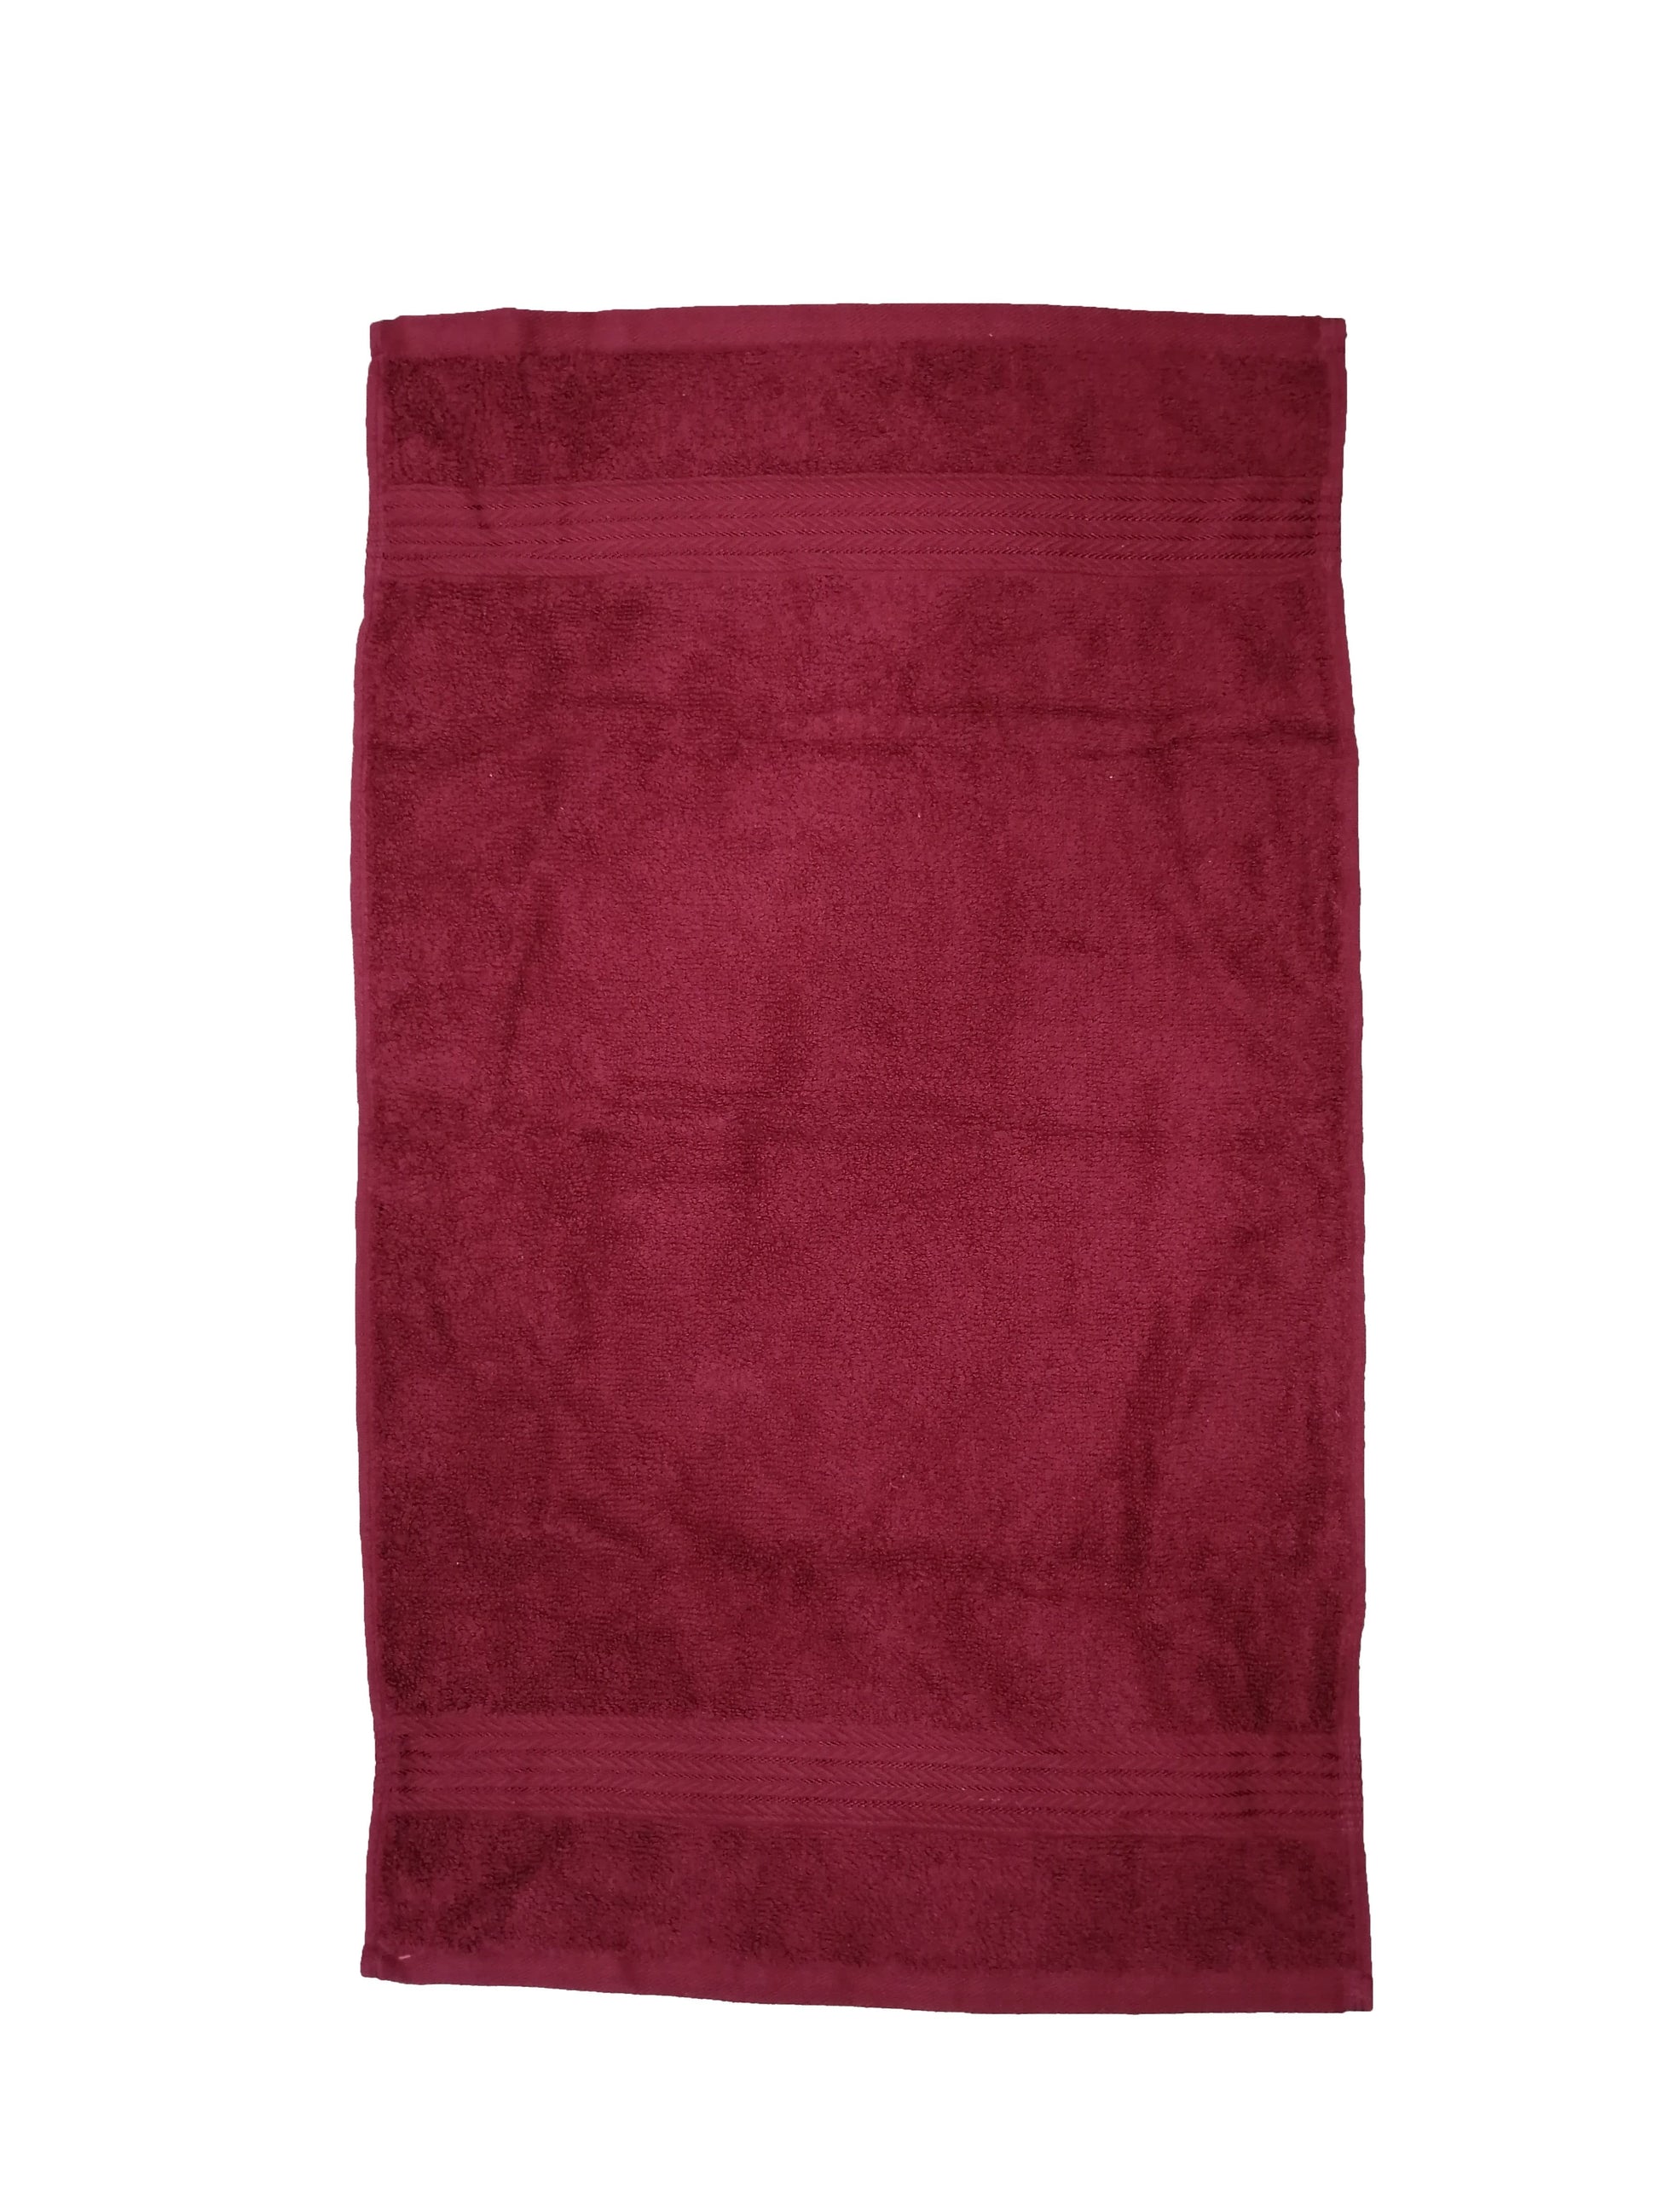 Home Accents Egyptian Towels 66.04 cm x 40.64 cm / Rustic Red Home Accents - Dual Performance Hand Towel